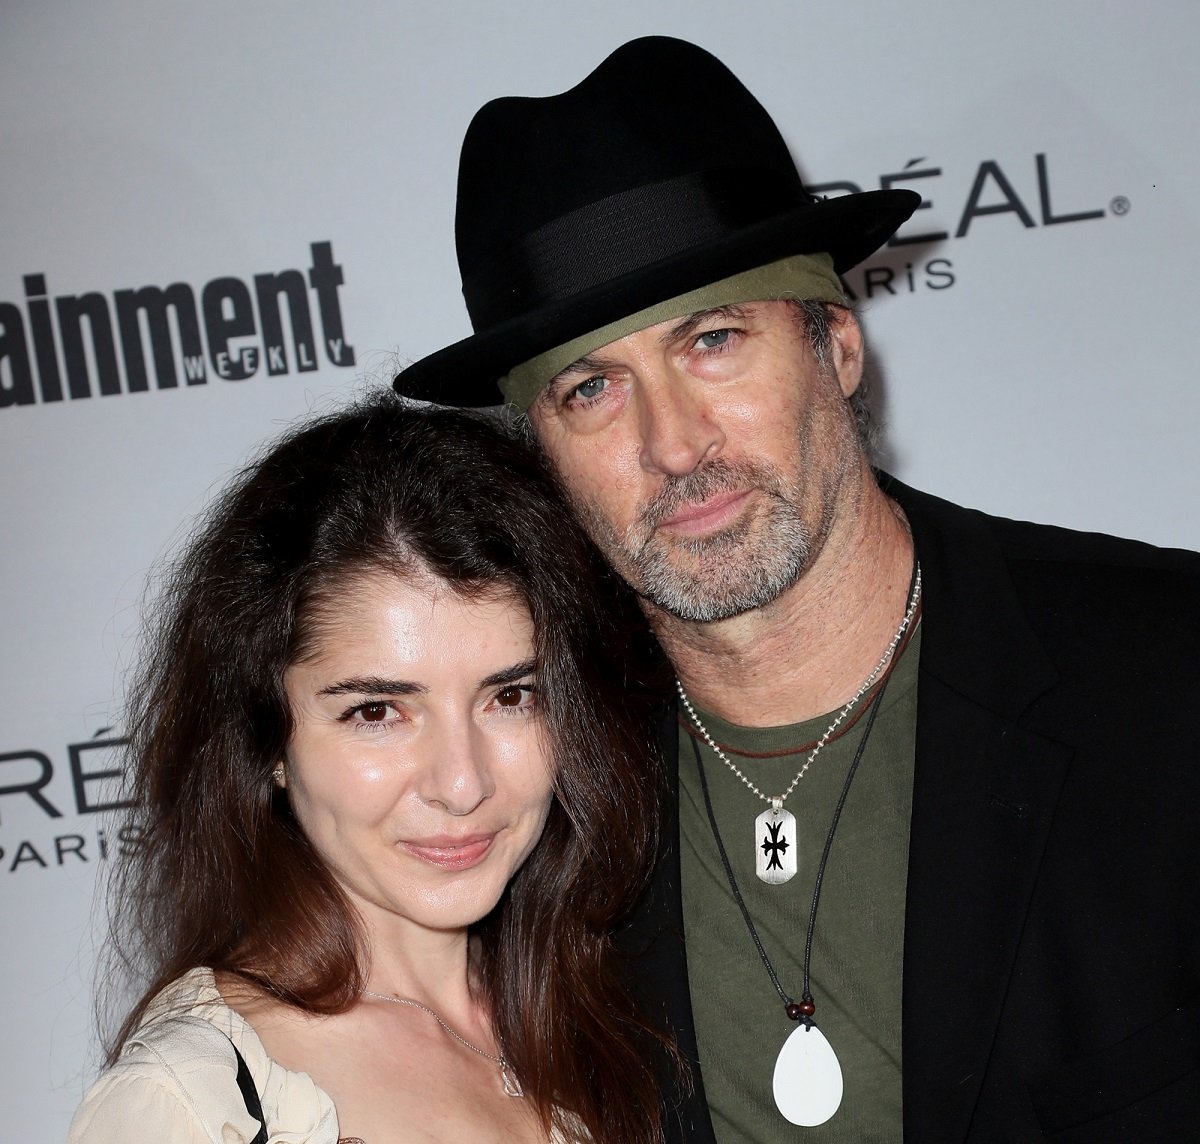 Kristine Saryan and Scott Patterson appear together at the 2016 Entertainment Weekly Pre-Emmy Party.  Saryan joined the 'Gilmore Girls' cast for one episode.  Patterson portrayed Luke Danes for seven seasons